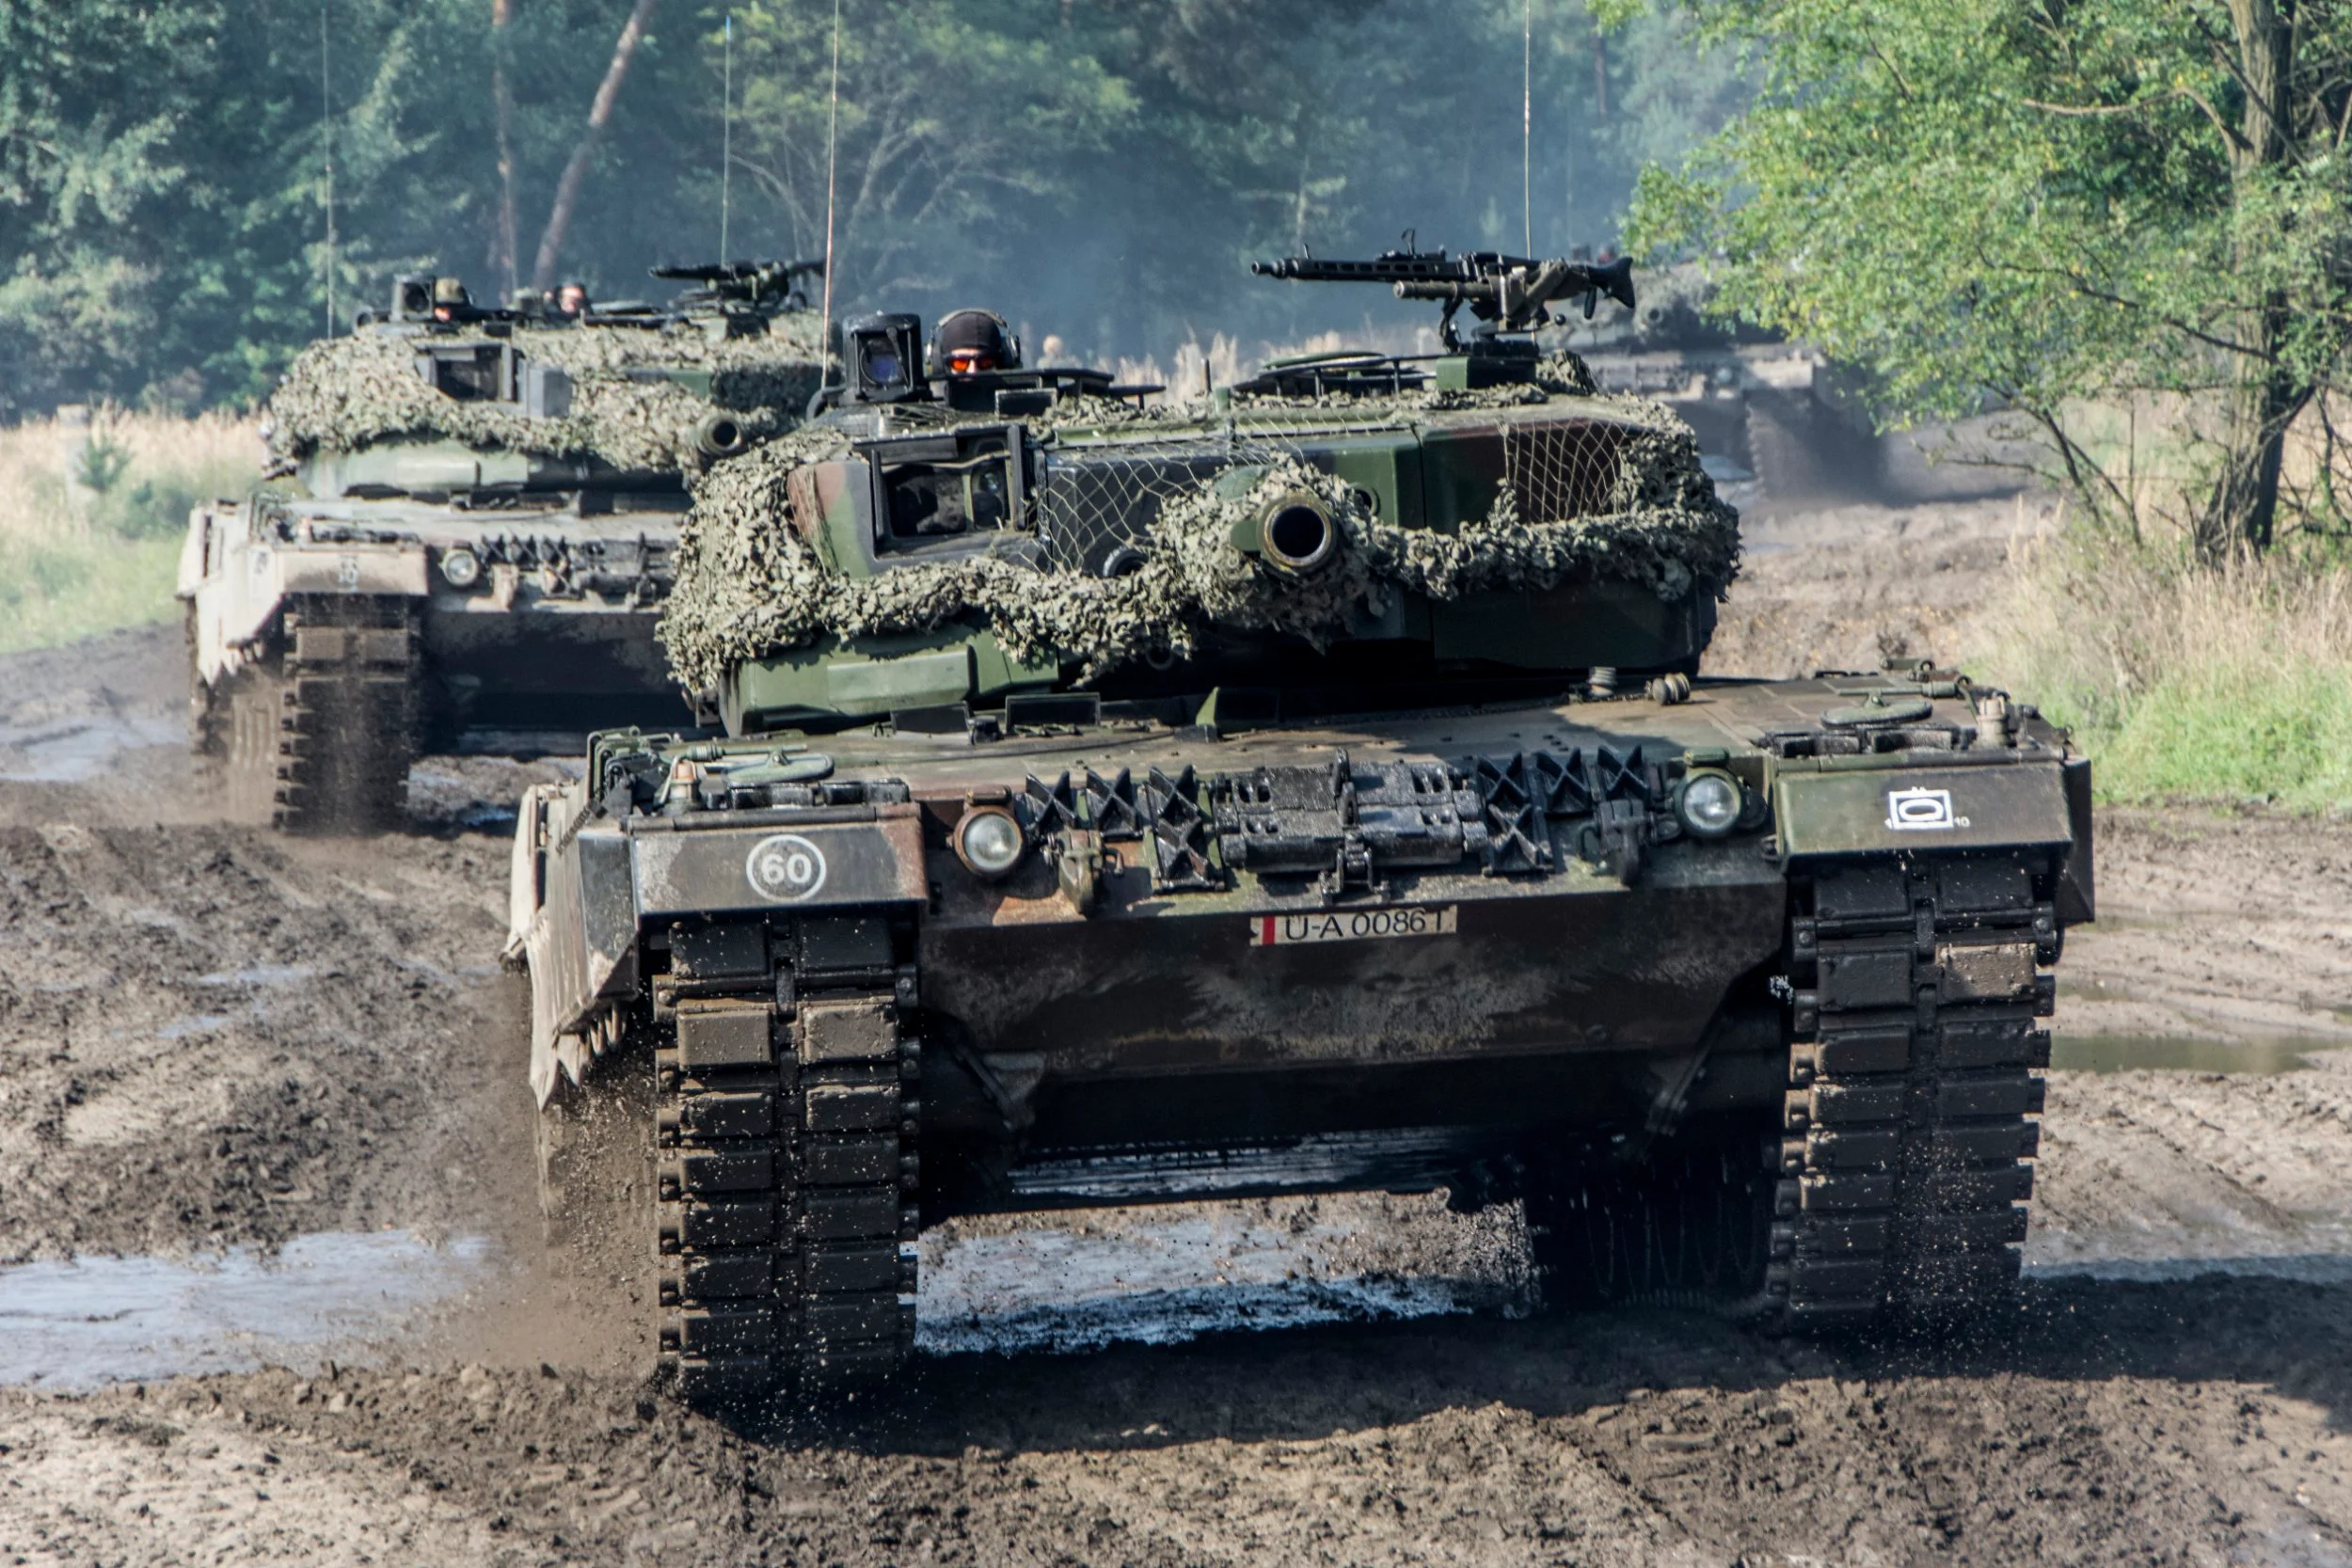 Andrey Kravtsov: The First Russian Soldier Rewarded for Destroying a Leopard Tank